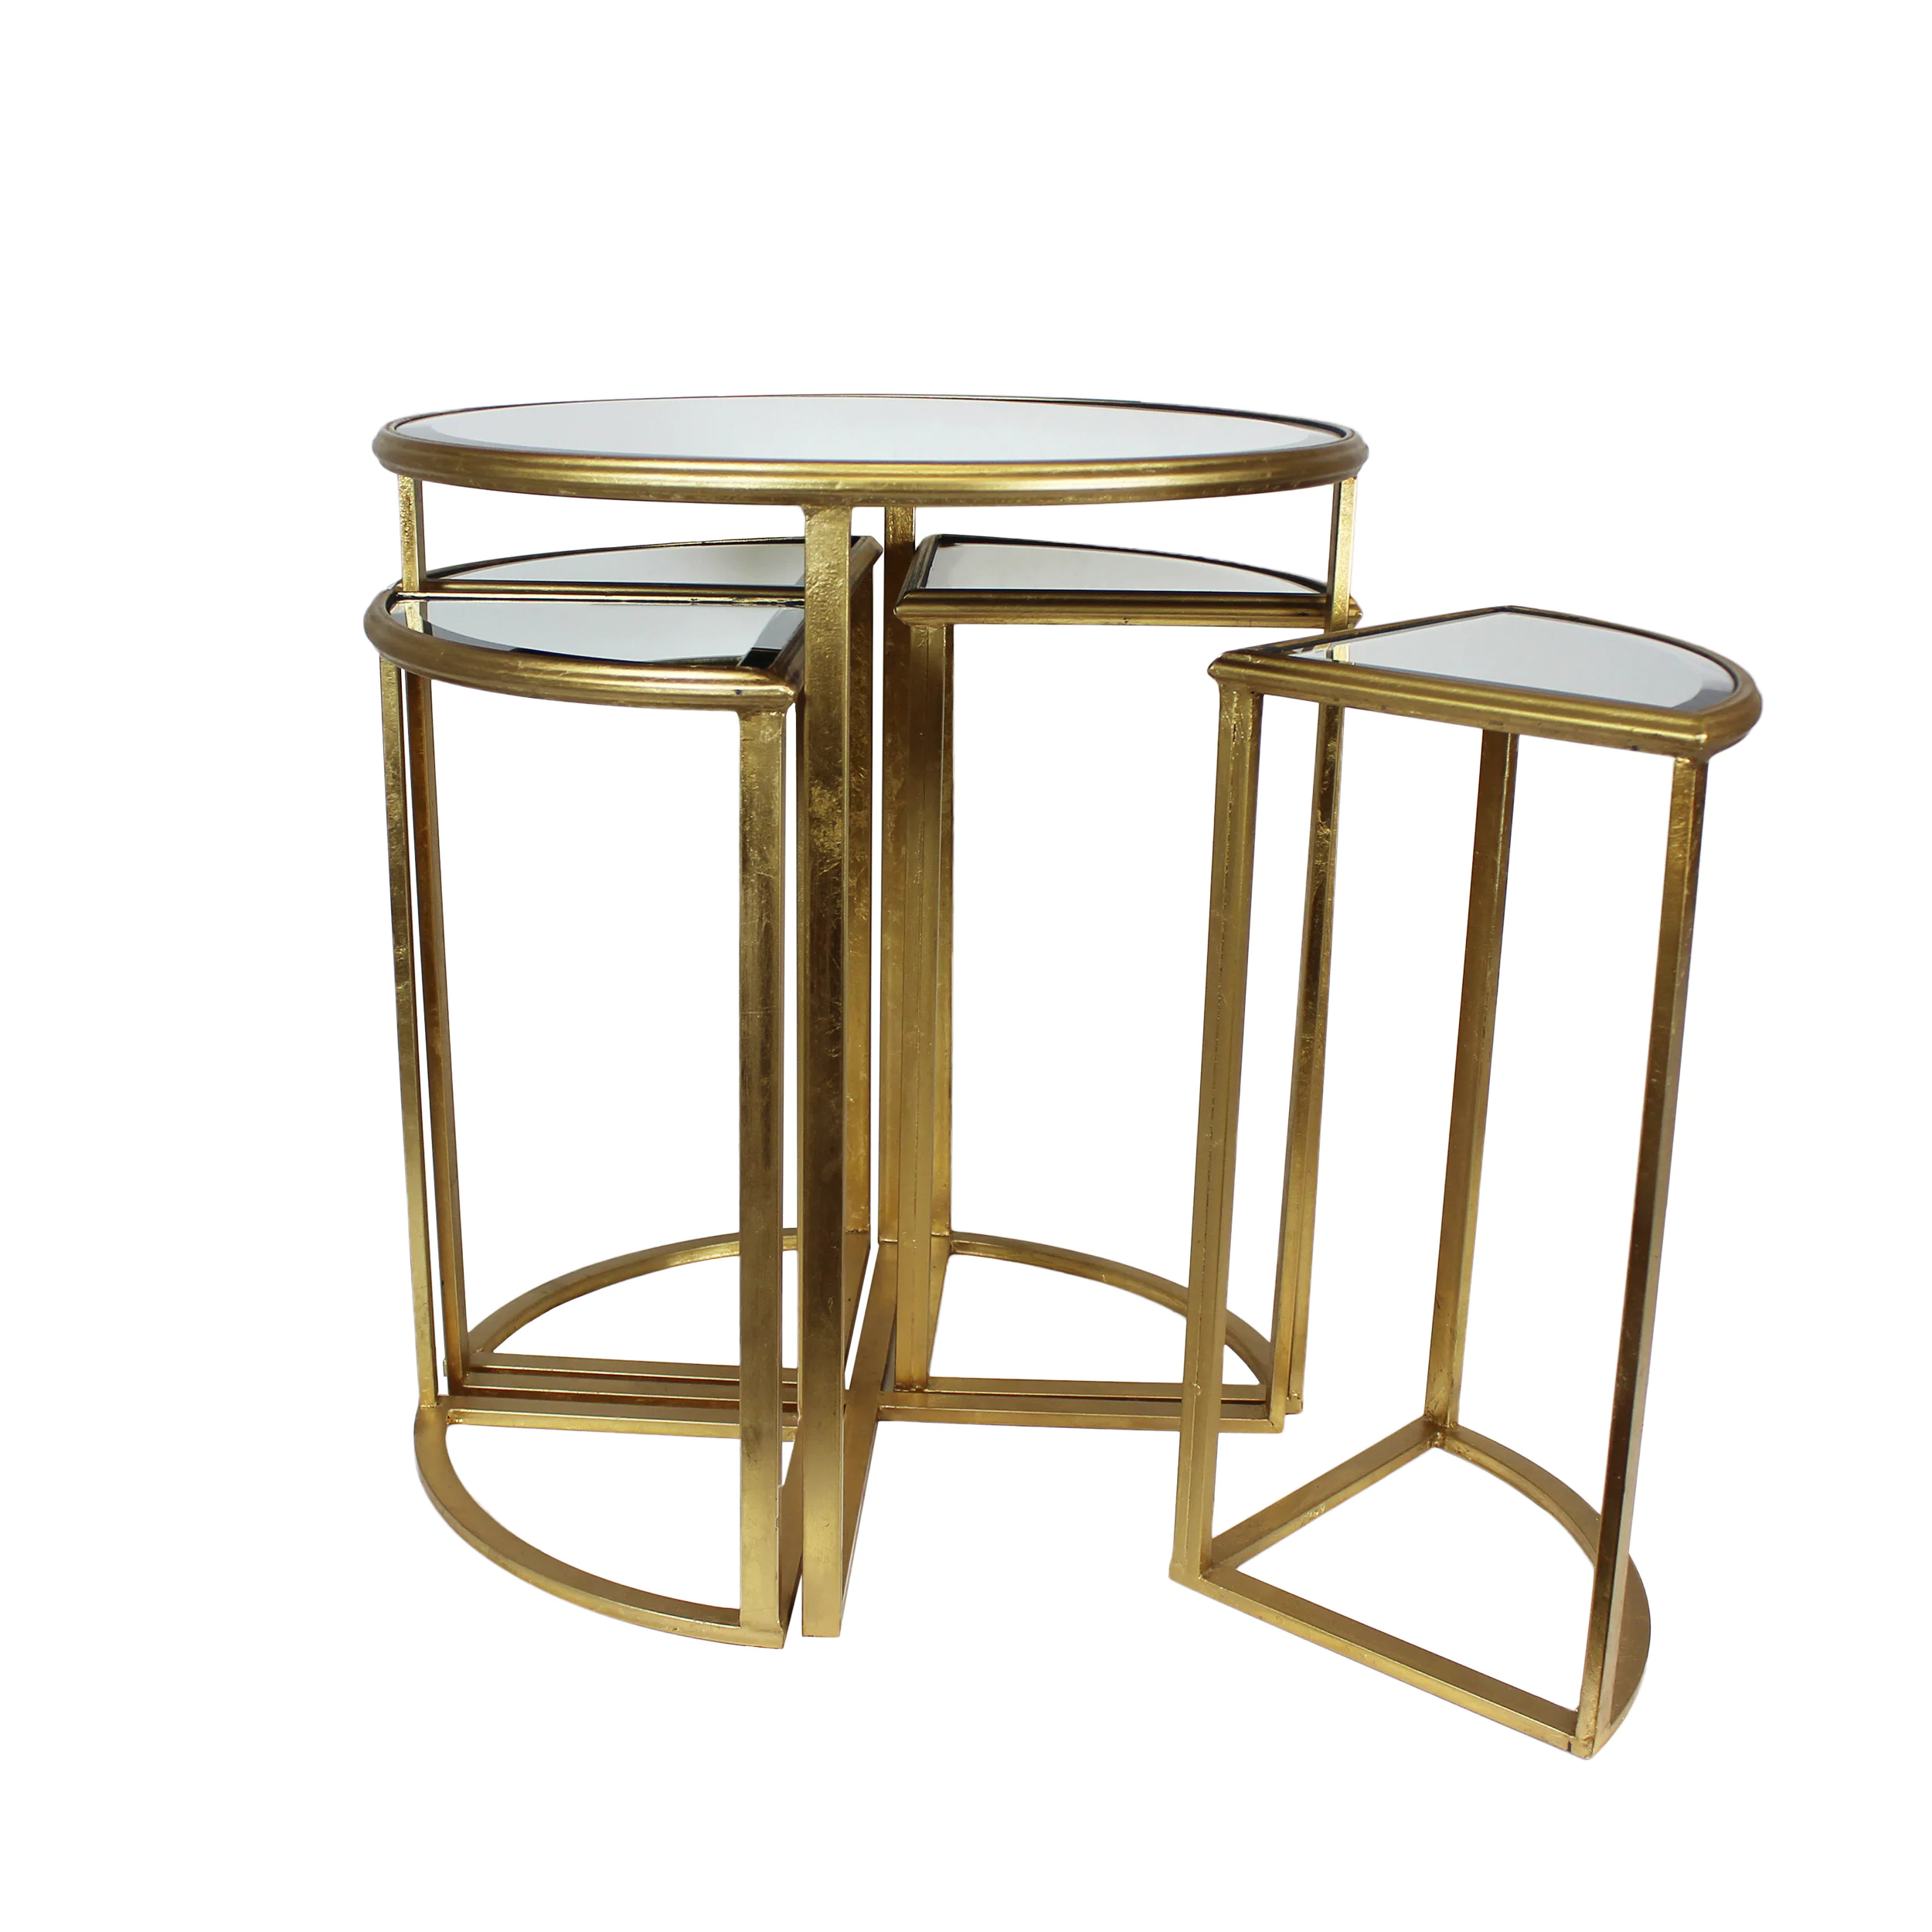 urban designs round gold mirror nesting accent table set free shipping today dining chair design decor metal drum black solid wood coffee corner linen napkins patio side tray end